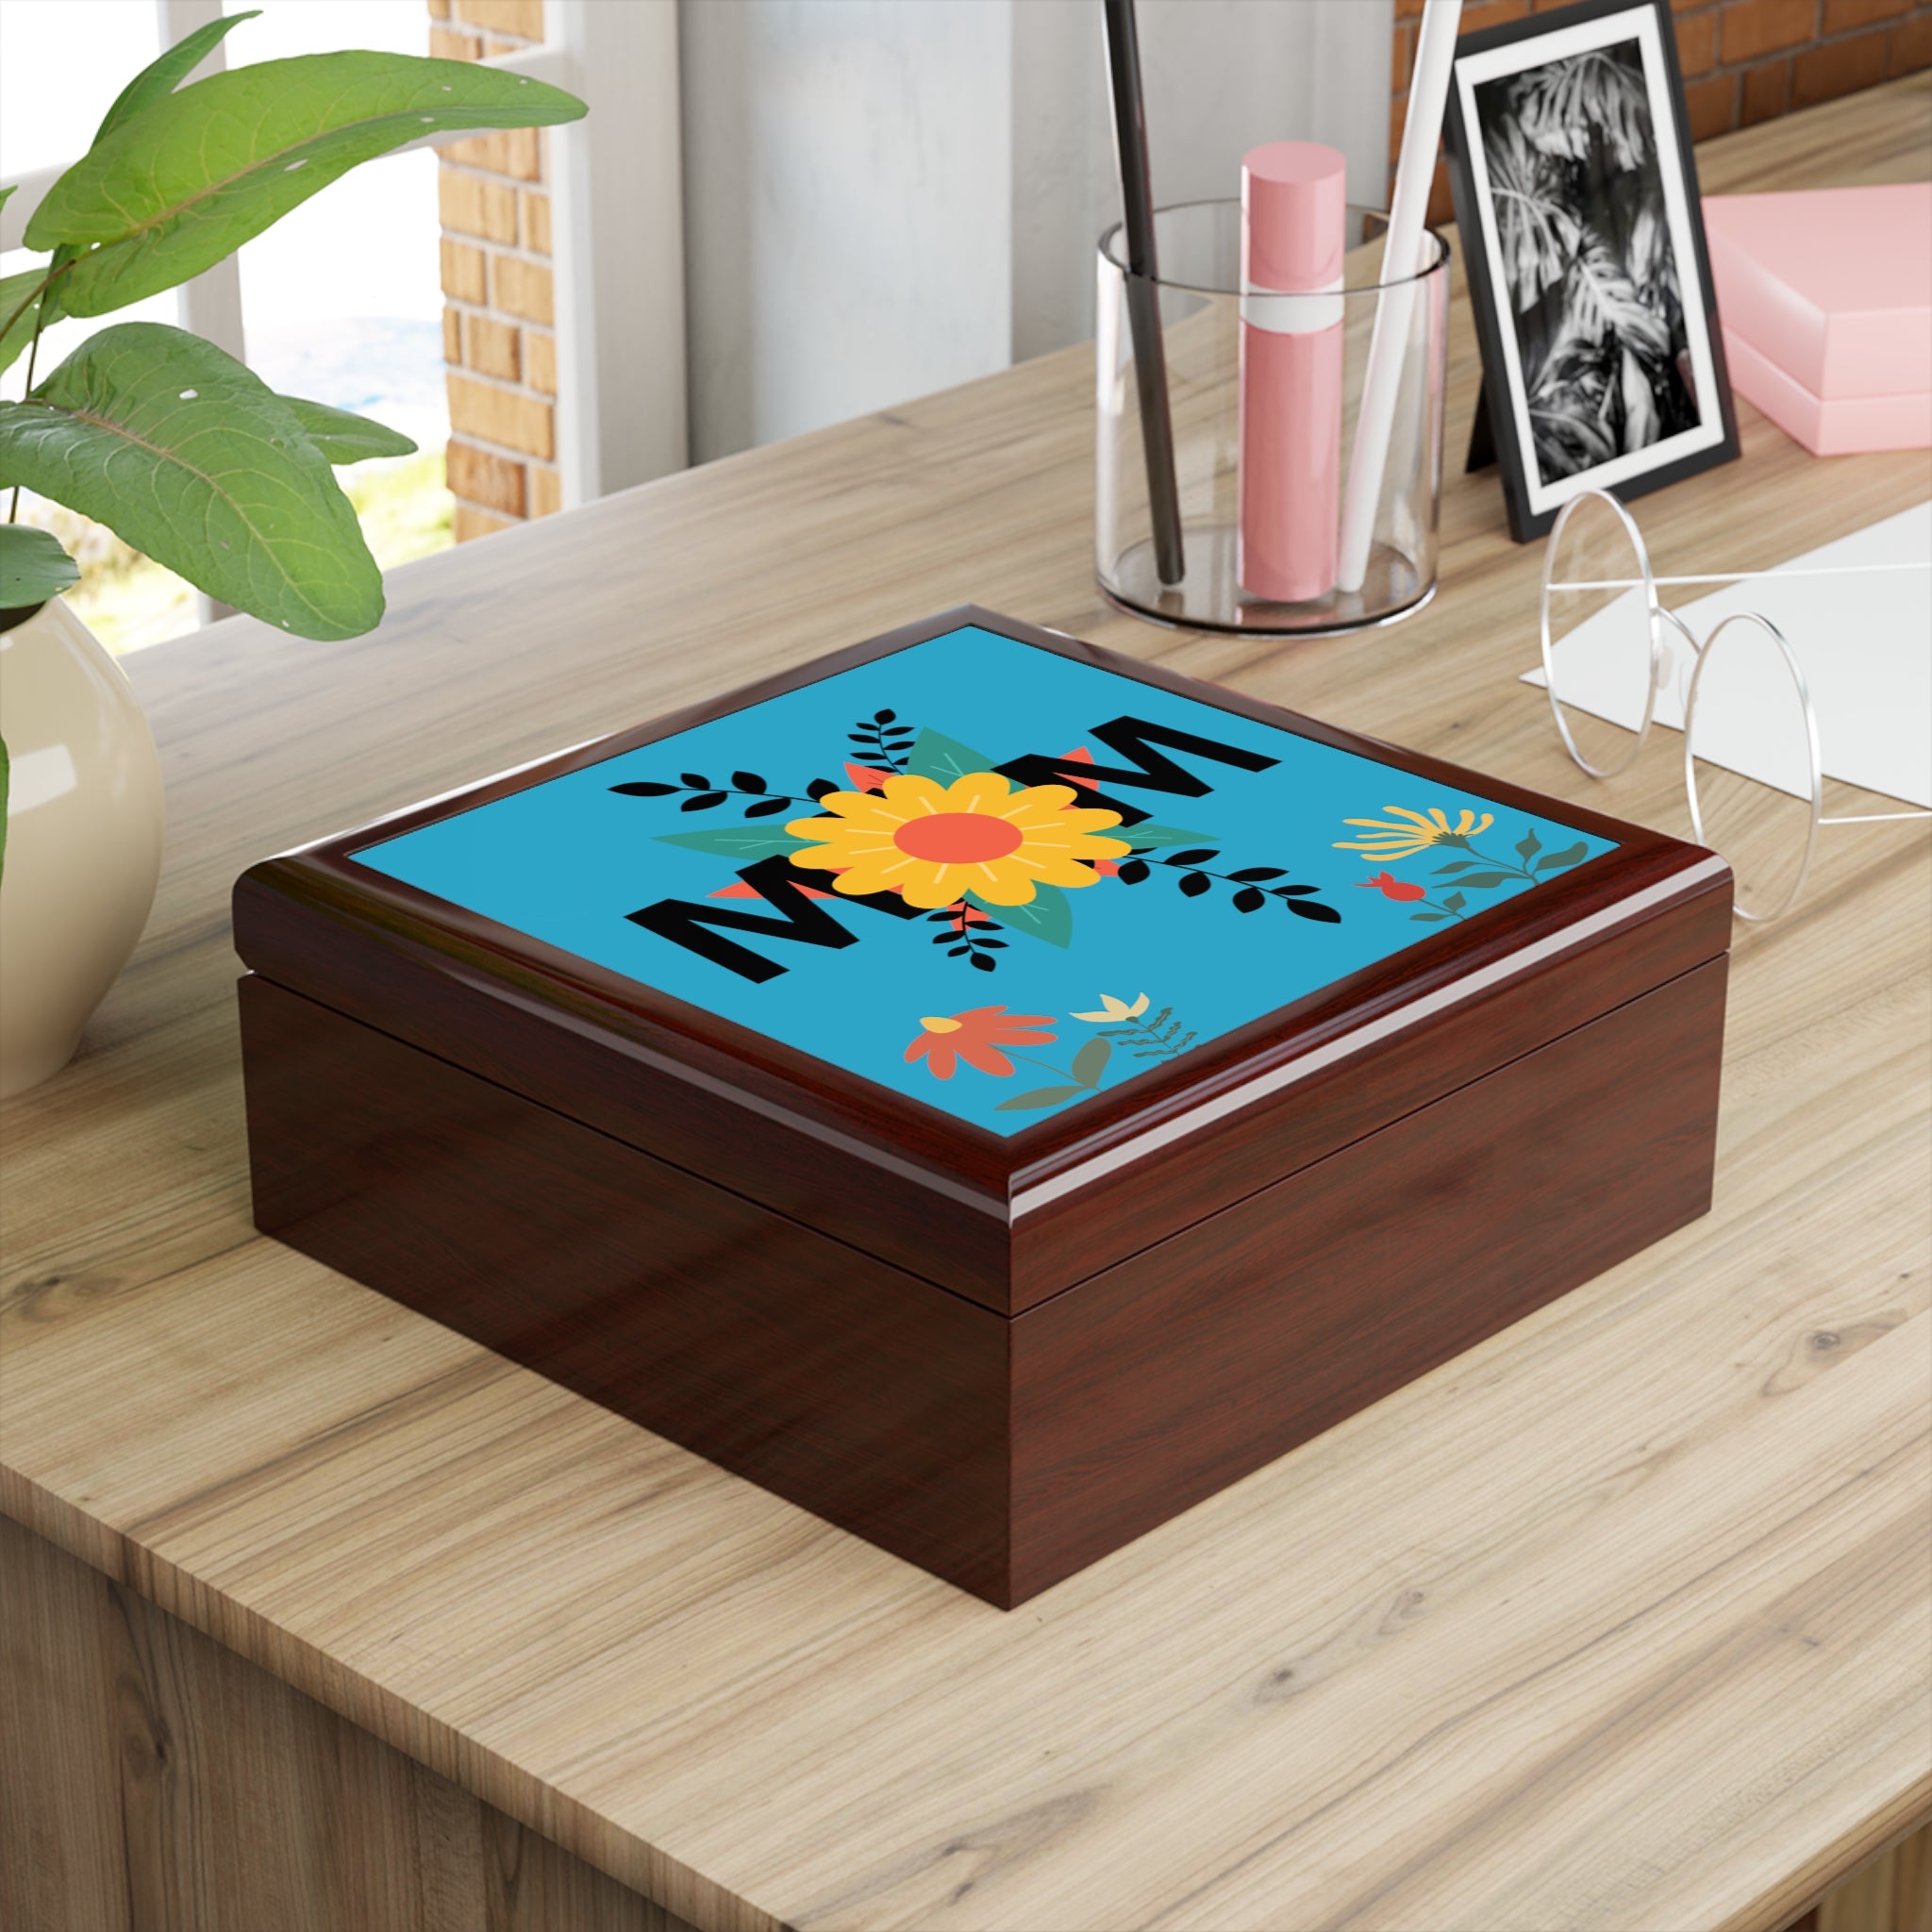 Floral Pattern Mom Design Jewelry Box Perfect for Mother's Day Gift